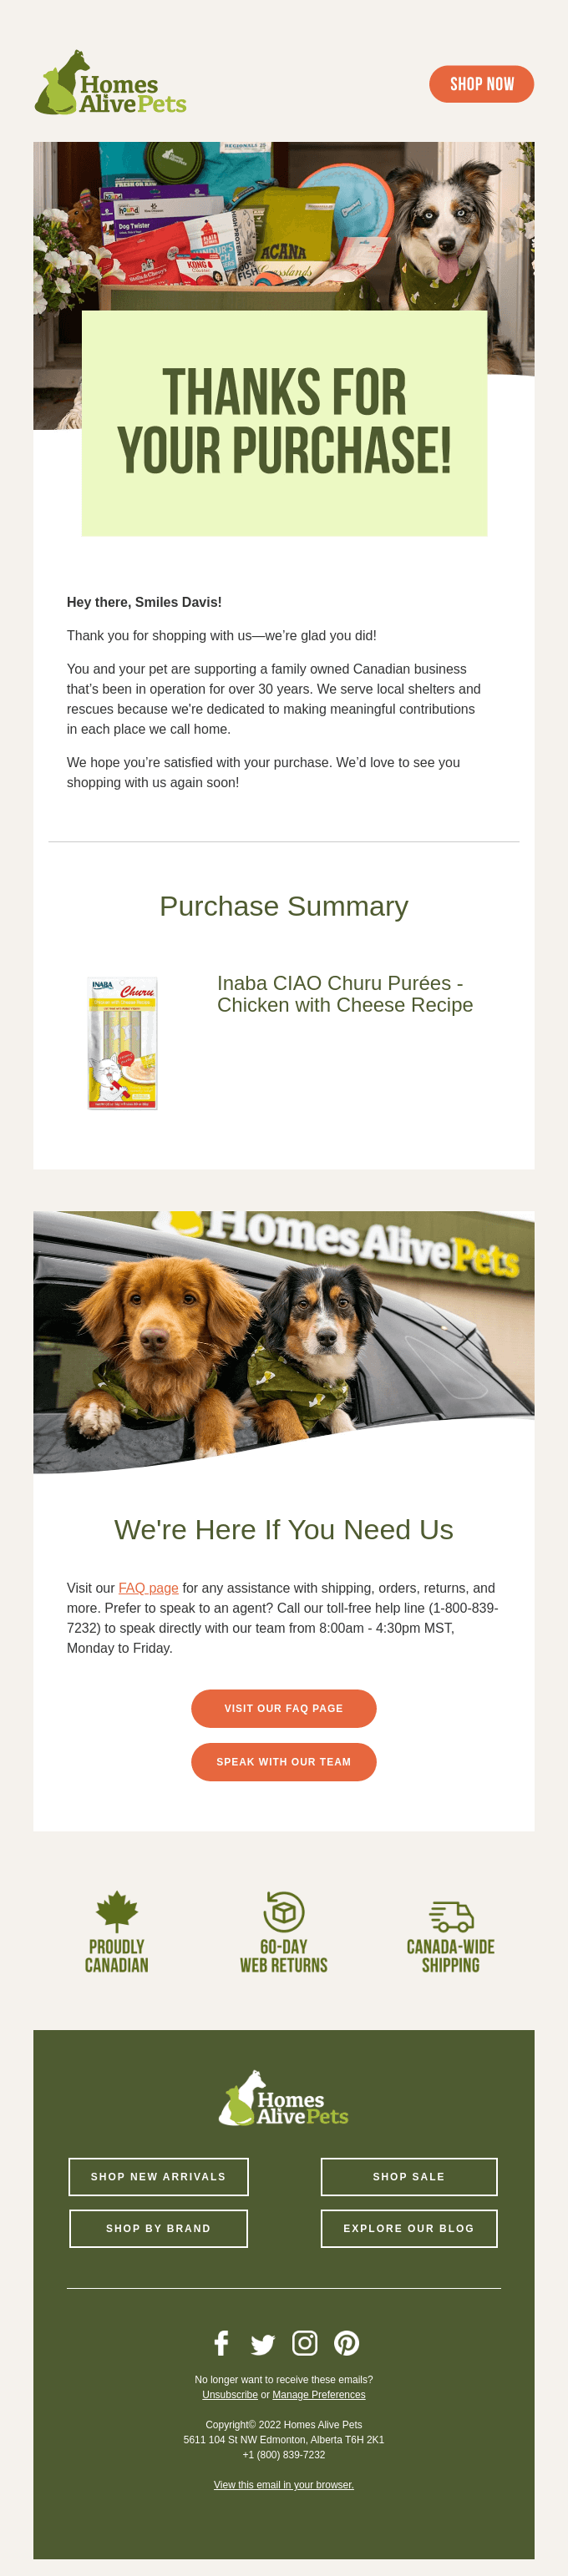 Home Alive Pets transactional email